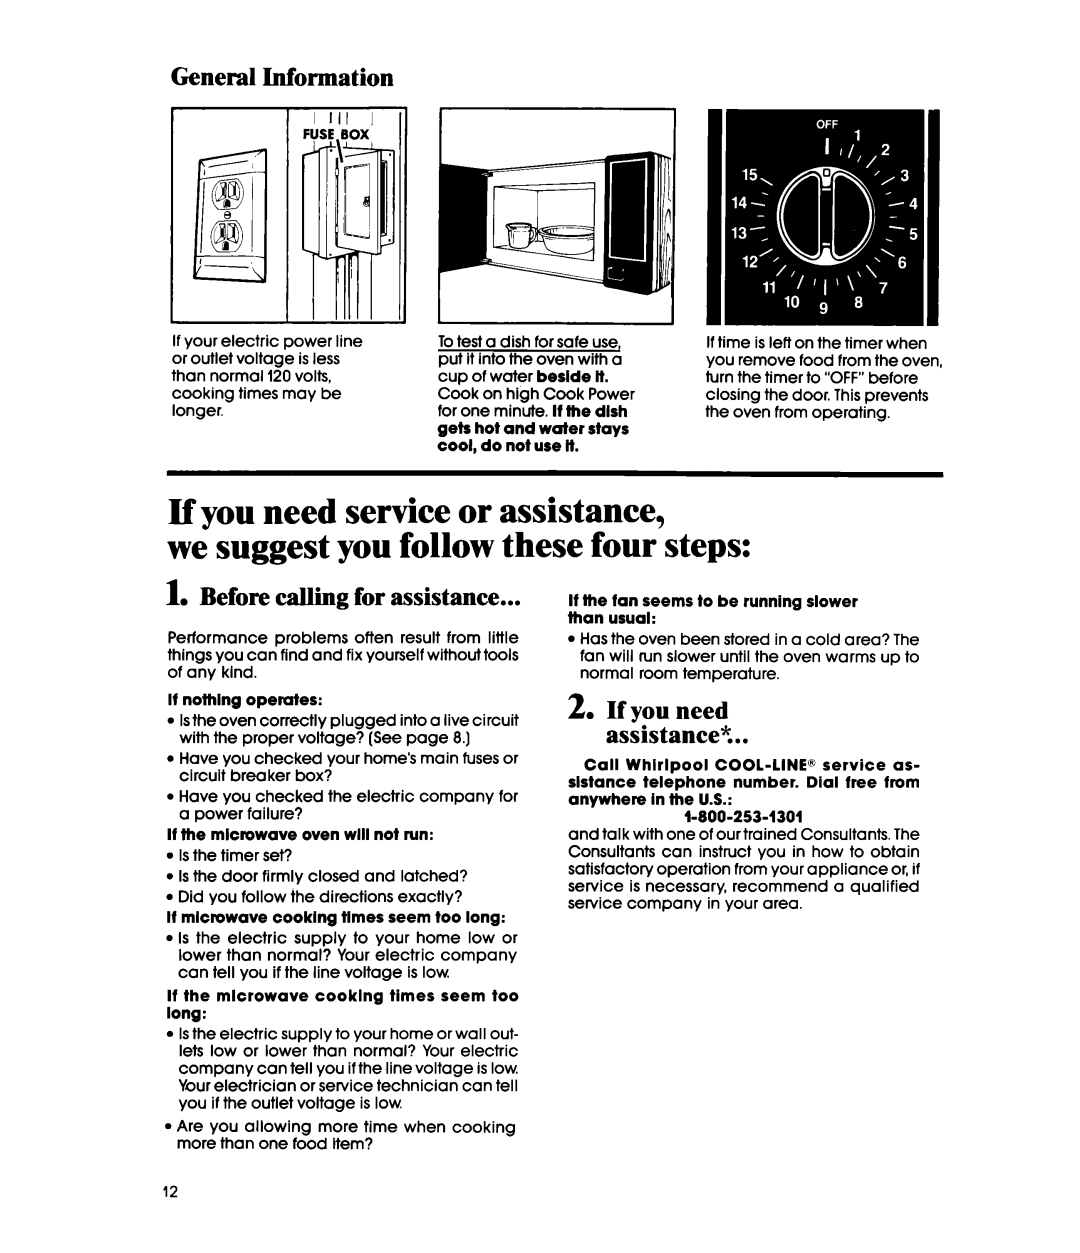 Whirlpool MWIOOOXS manual If you need service or assistance, we suggest you follow these four steps, General Information 